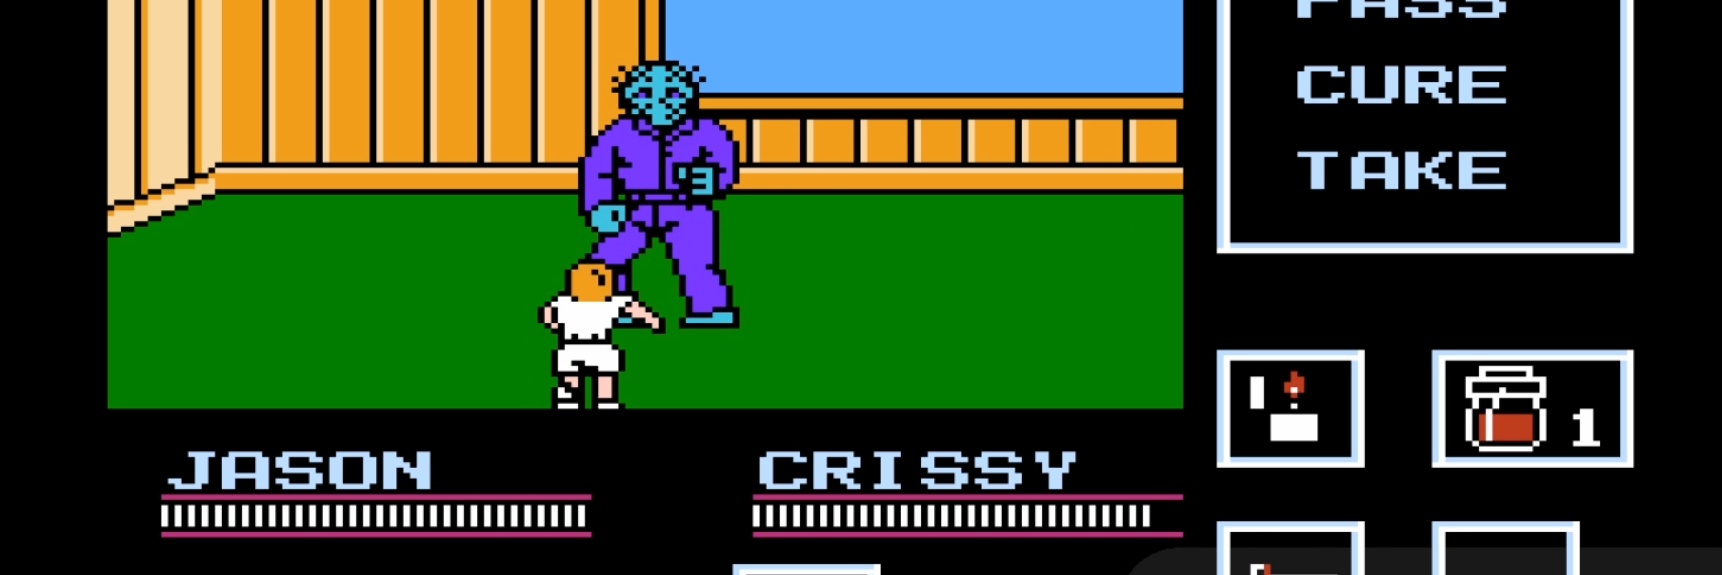 Jason Voorhees – Friday the 13th NES